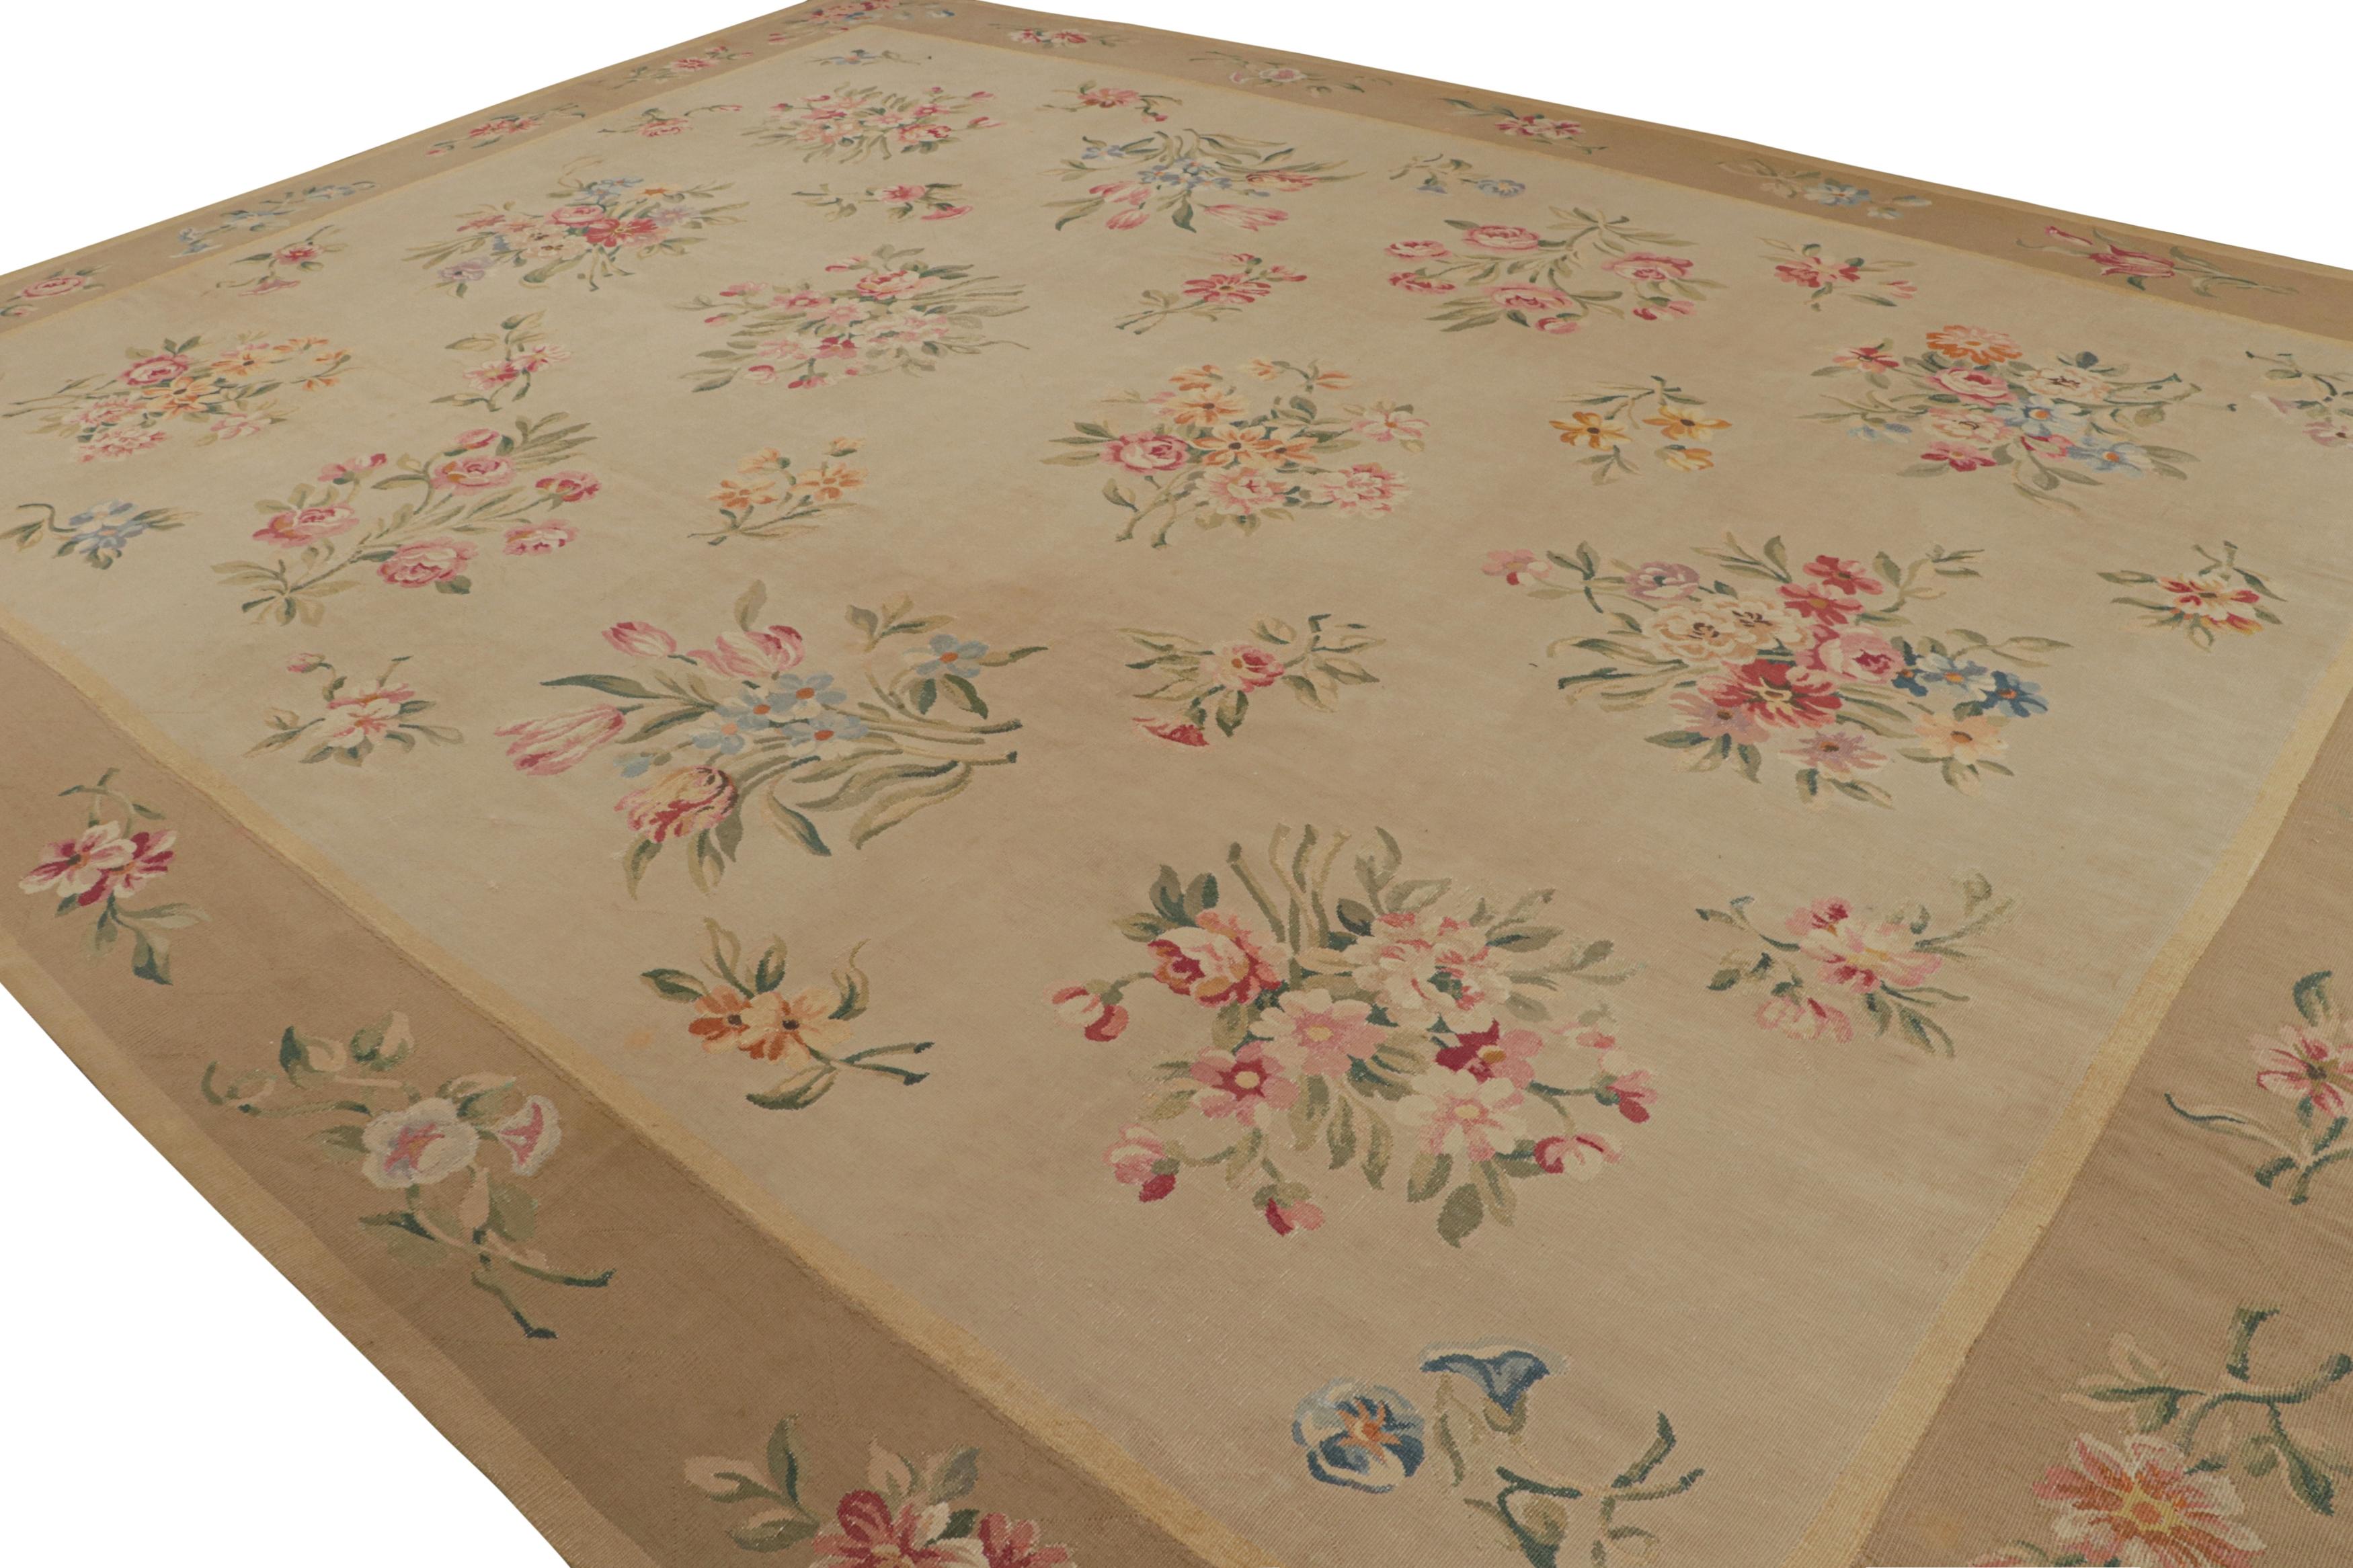 Hand-Woven Antique Aubusson Rug in Beige-Brown with Floral Patterns, from Rug & Kilim For Sale